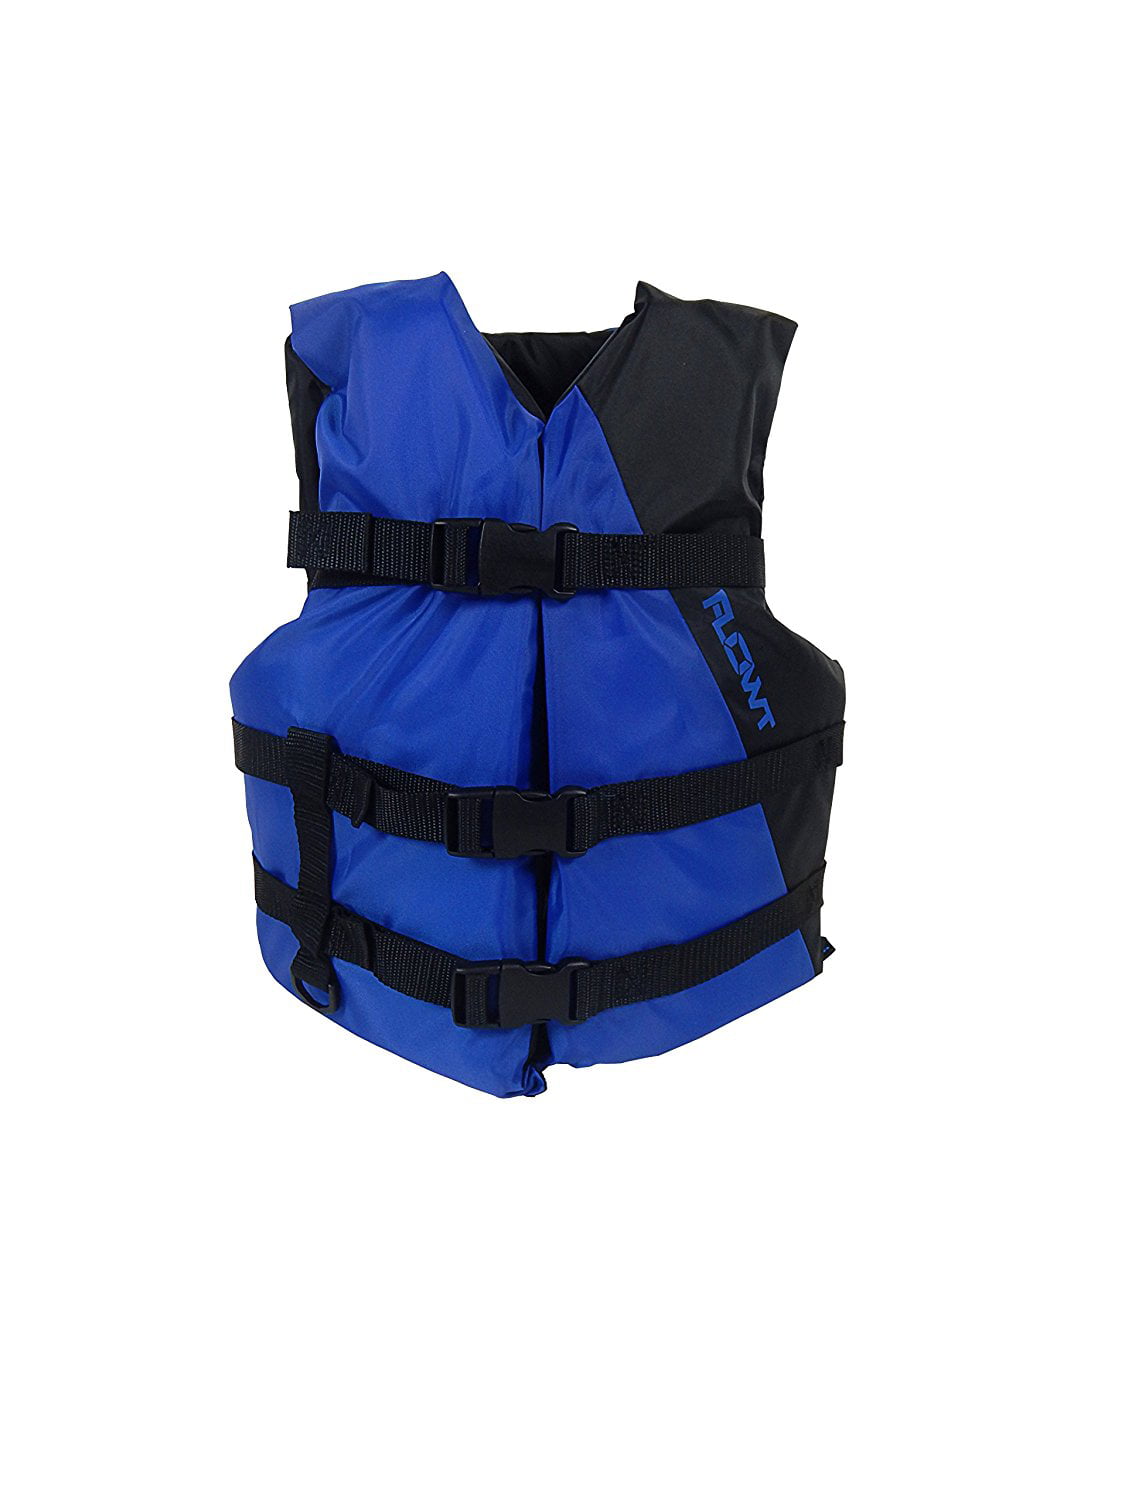 Child Fits 0-50 lbs Waterbrands 40302-2-INFCLD USCG Approved PFD Type II PFD Infant Flowt All Sport Life Vest 